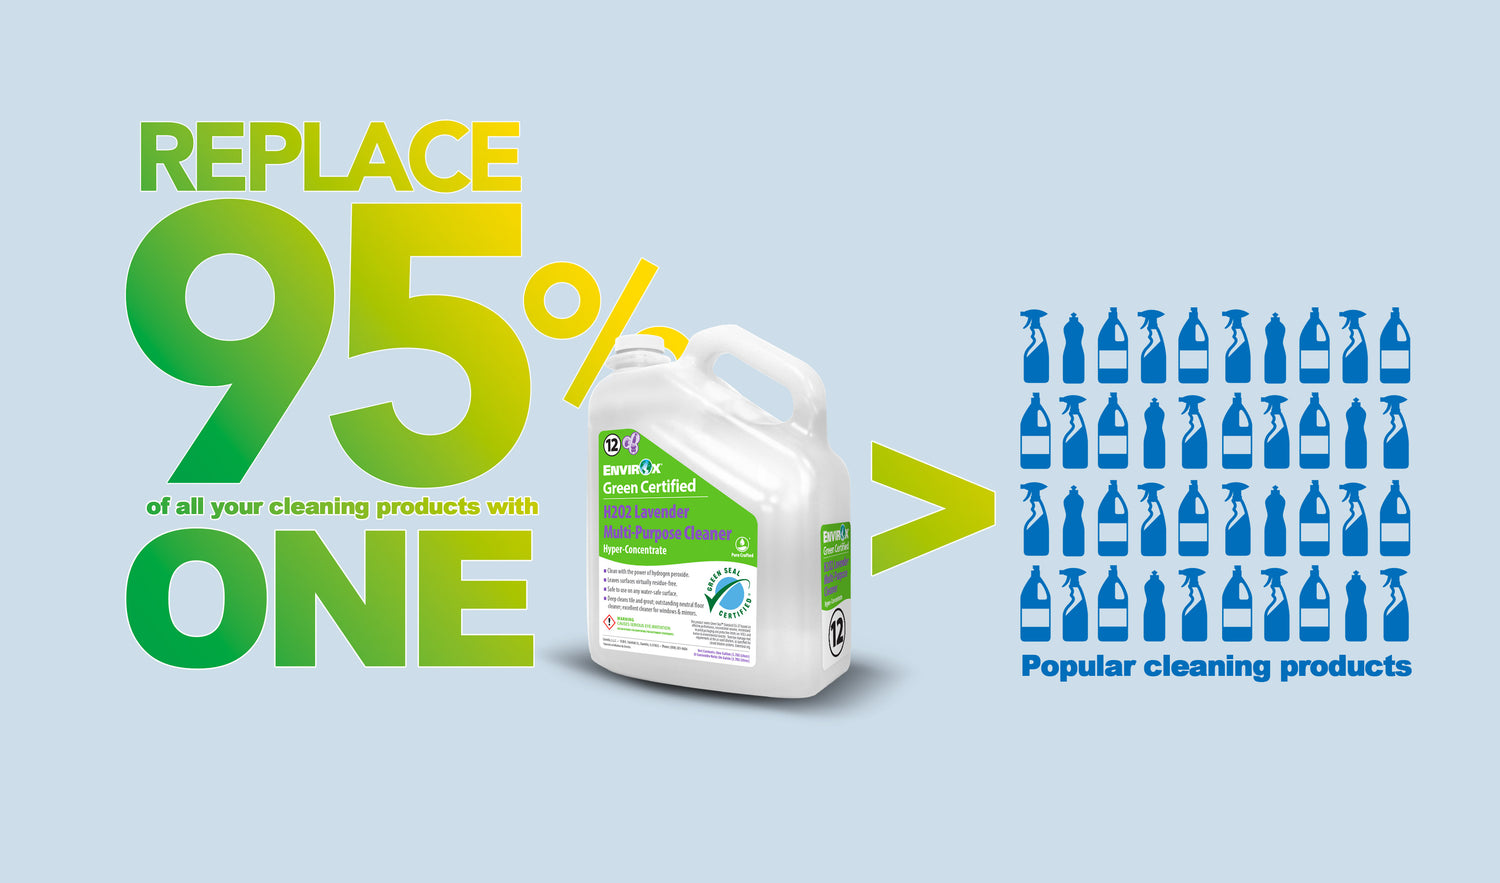 Enviro-One All-Purpose Green CLEANER; Your Eco-Friendly Cleaning Solution - Enviro-One